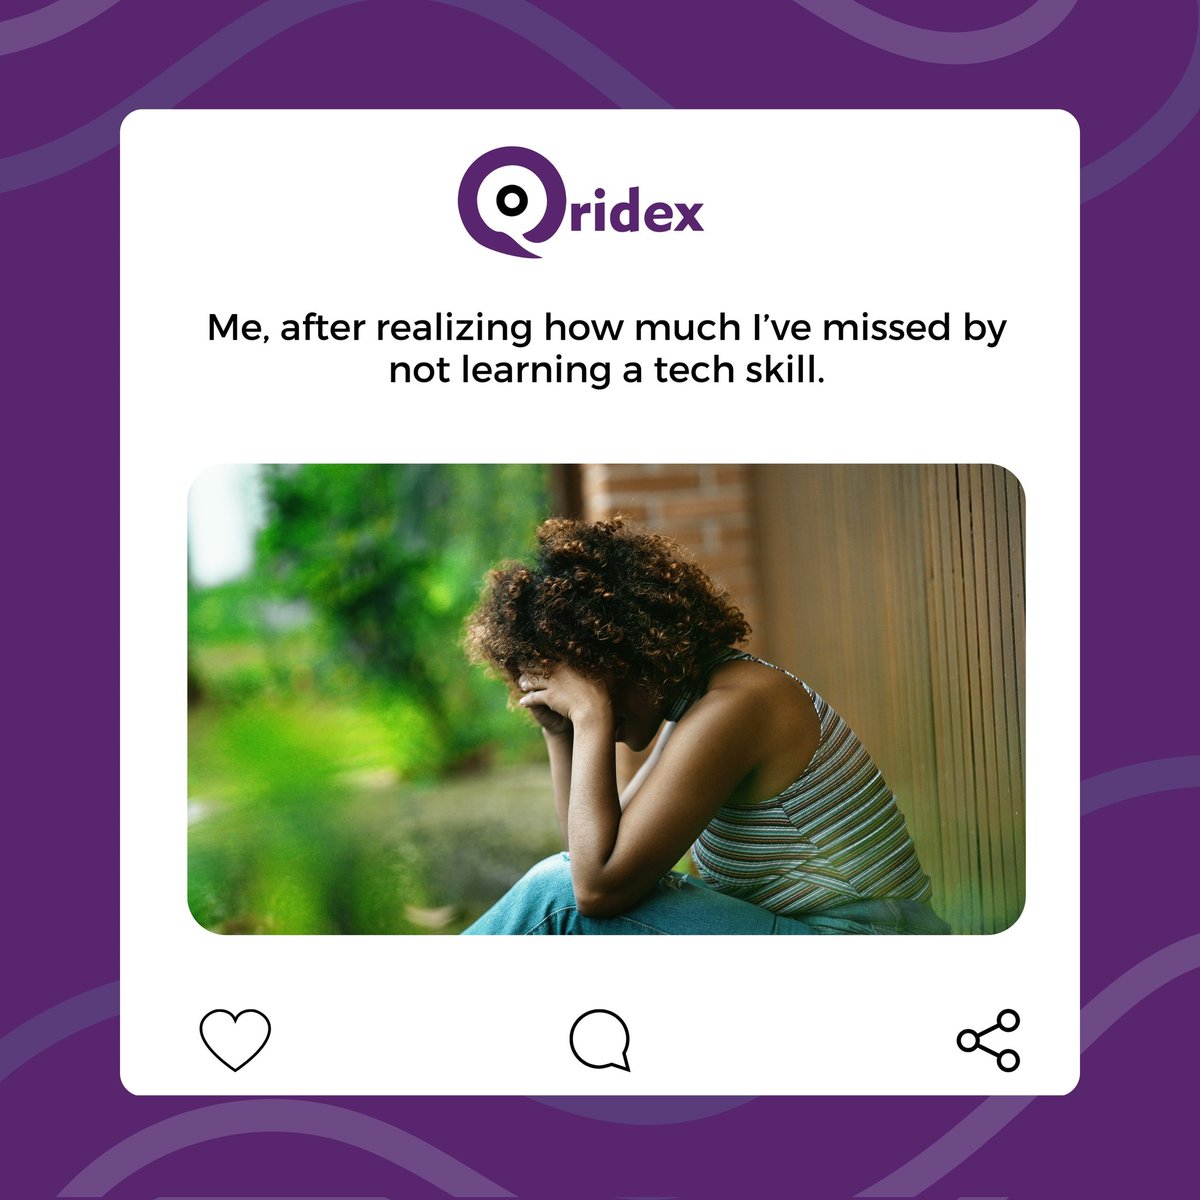 It's a new week. 

A new month starts soon. Don't miss out on the opportunity to go get your dreams.

We are taking new intakes for our courses.

Send us a direct message or use the link on our bio to chat with someone. 

#job #tech #techjob #qridex #TechTraining